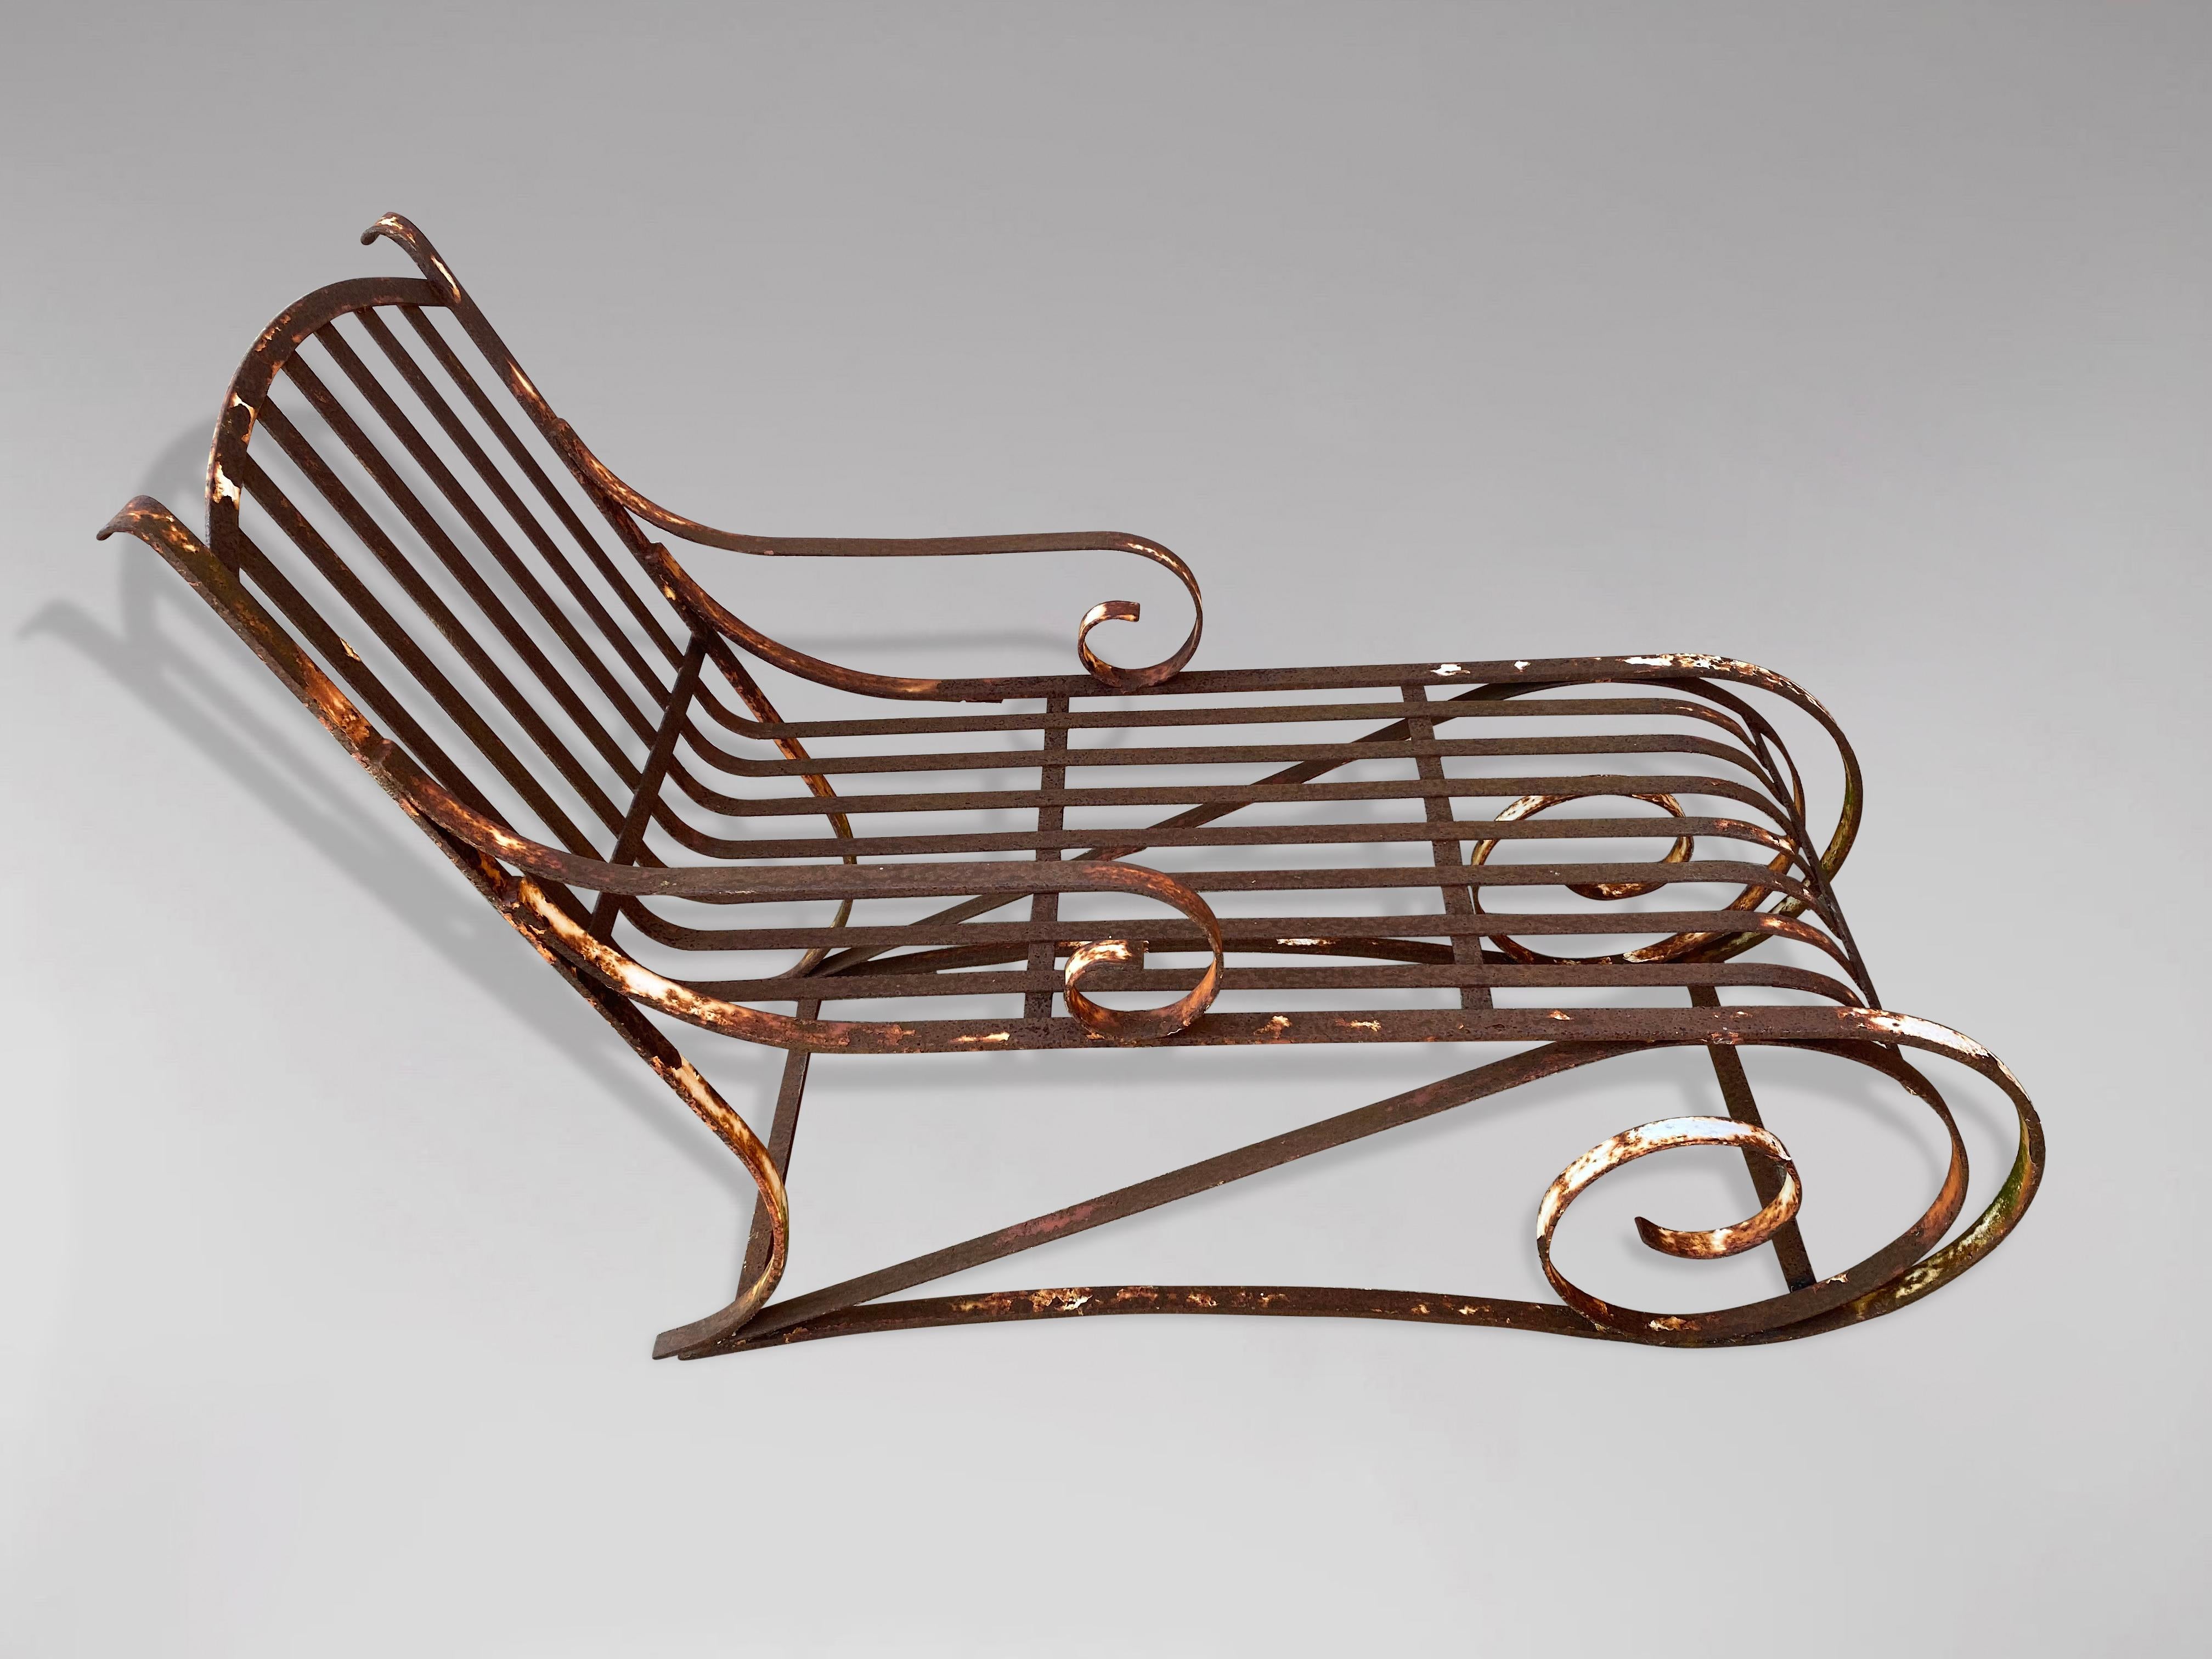 Victorian 19th Century Wrought Iron Chaise Longue Lounger